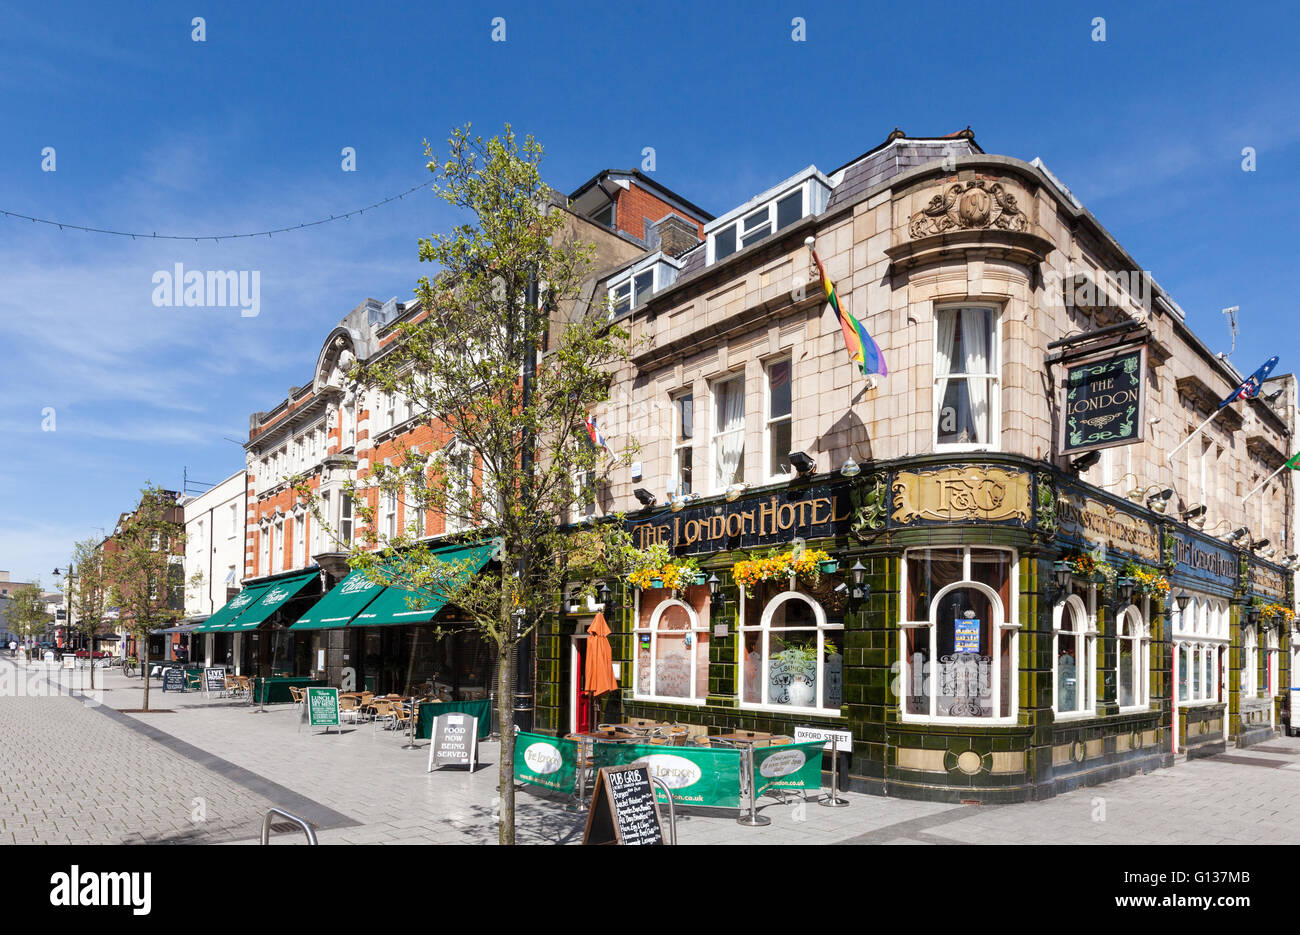 The London Hotel pub and Oxford Street in Southampton, Hampshire, UK Stock Photo